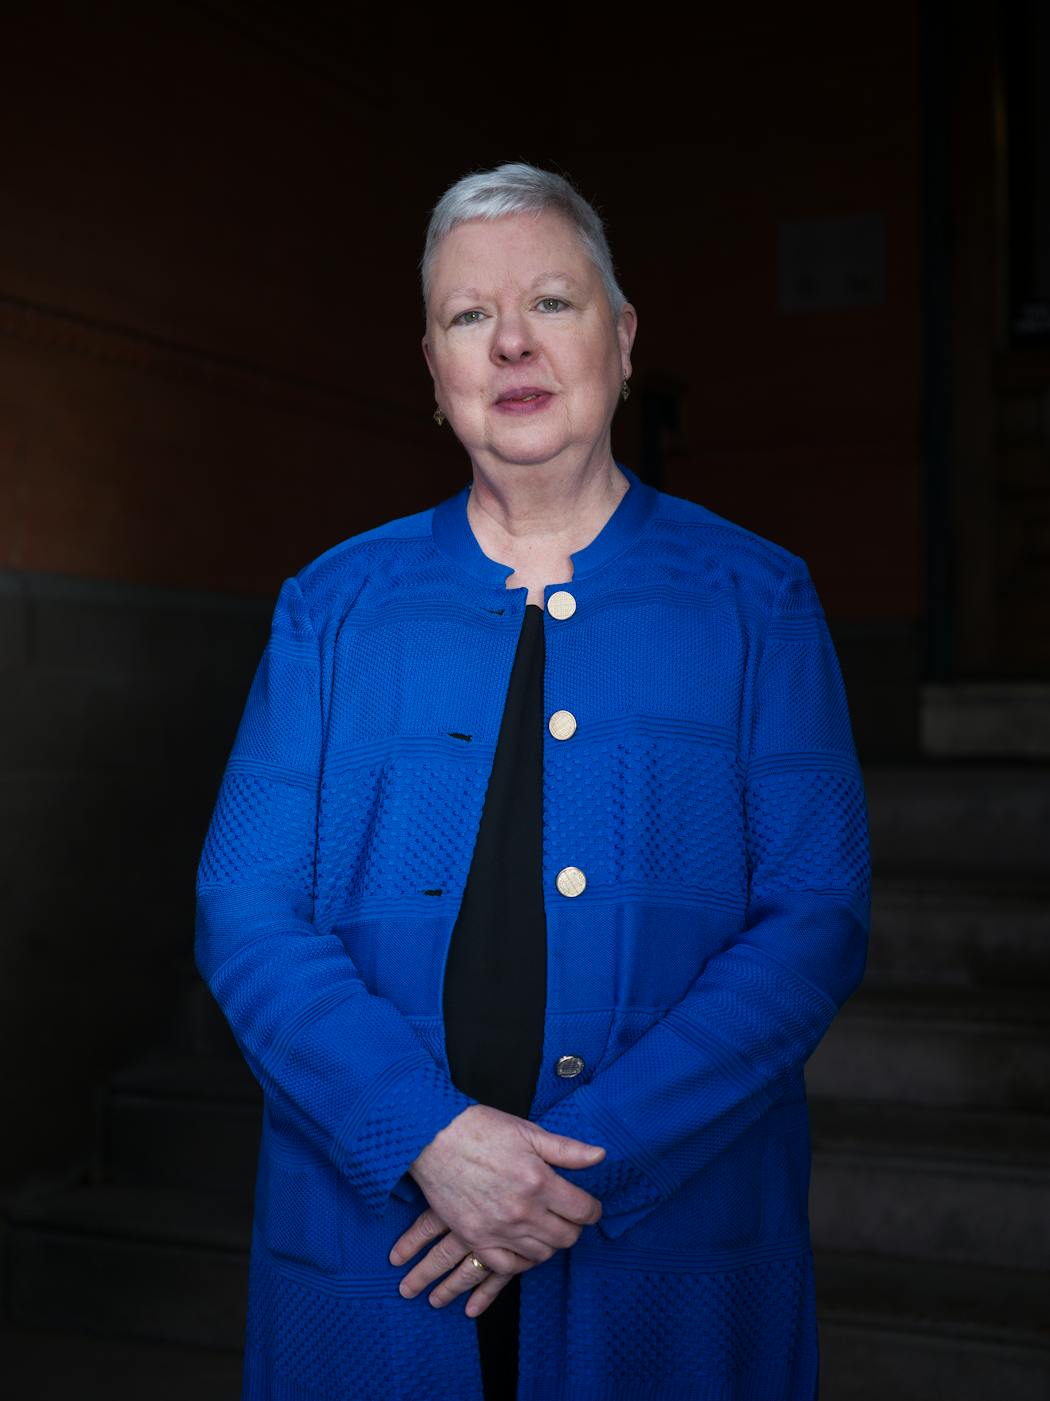 Hamline University’s new acting/interim president, Kathleen Murray, posed for a portrait Monday. Murray is starting her term and discussing her plans for helping the St. Paul private school rebound from the fallout of the Islamic art controversy that drew international attention last year.